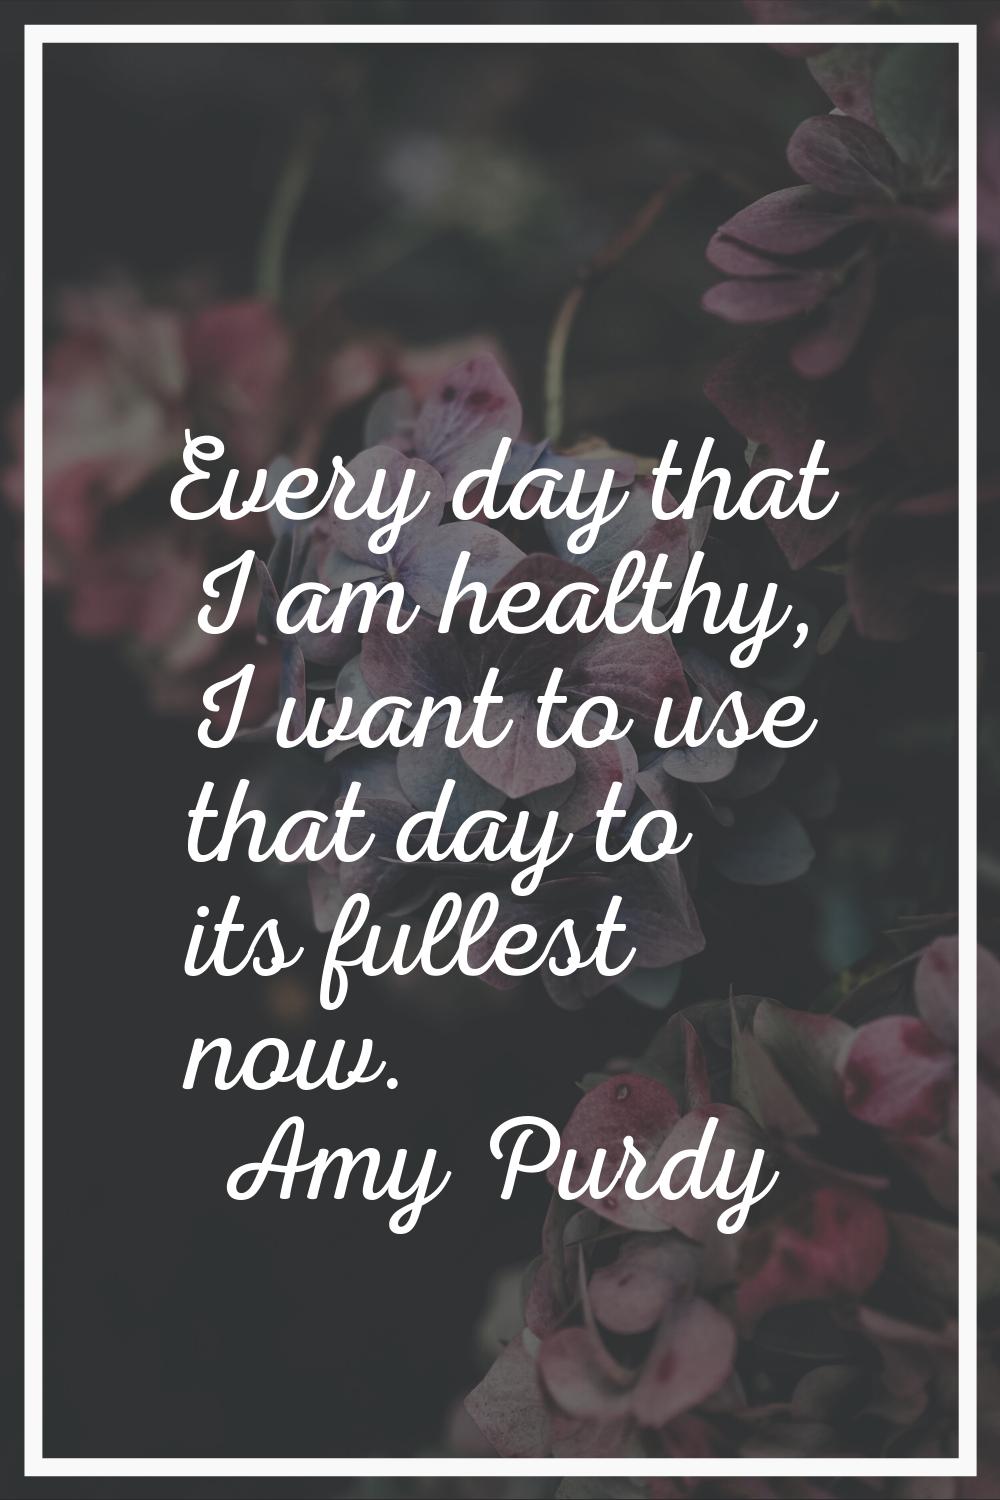 Every day that I am healthy, I want to use that day to its fullest now.